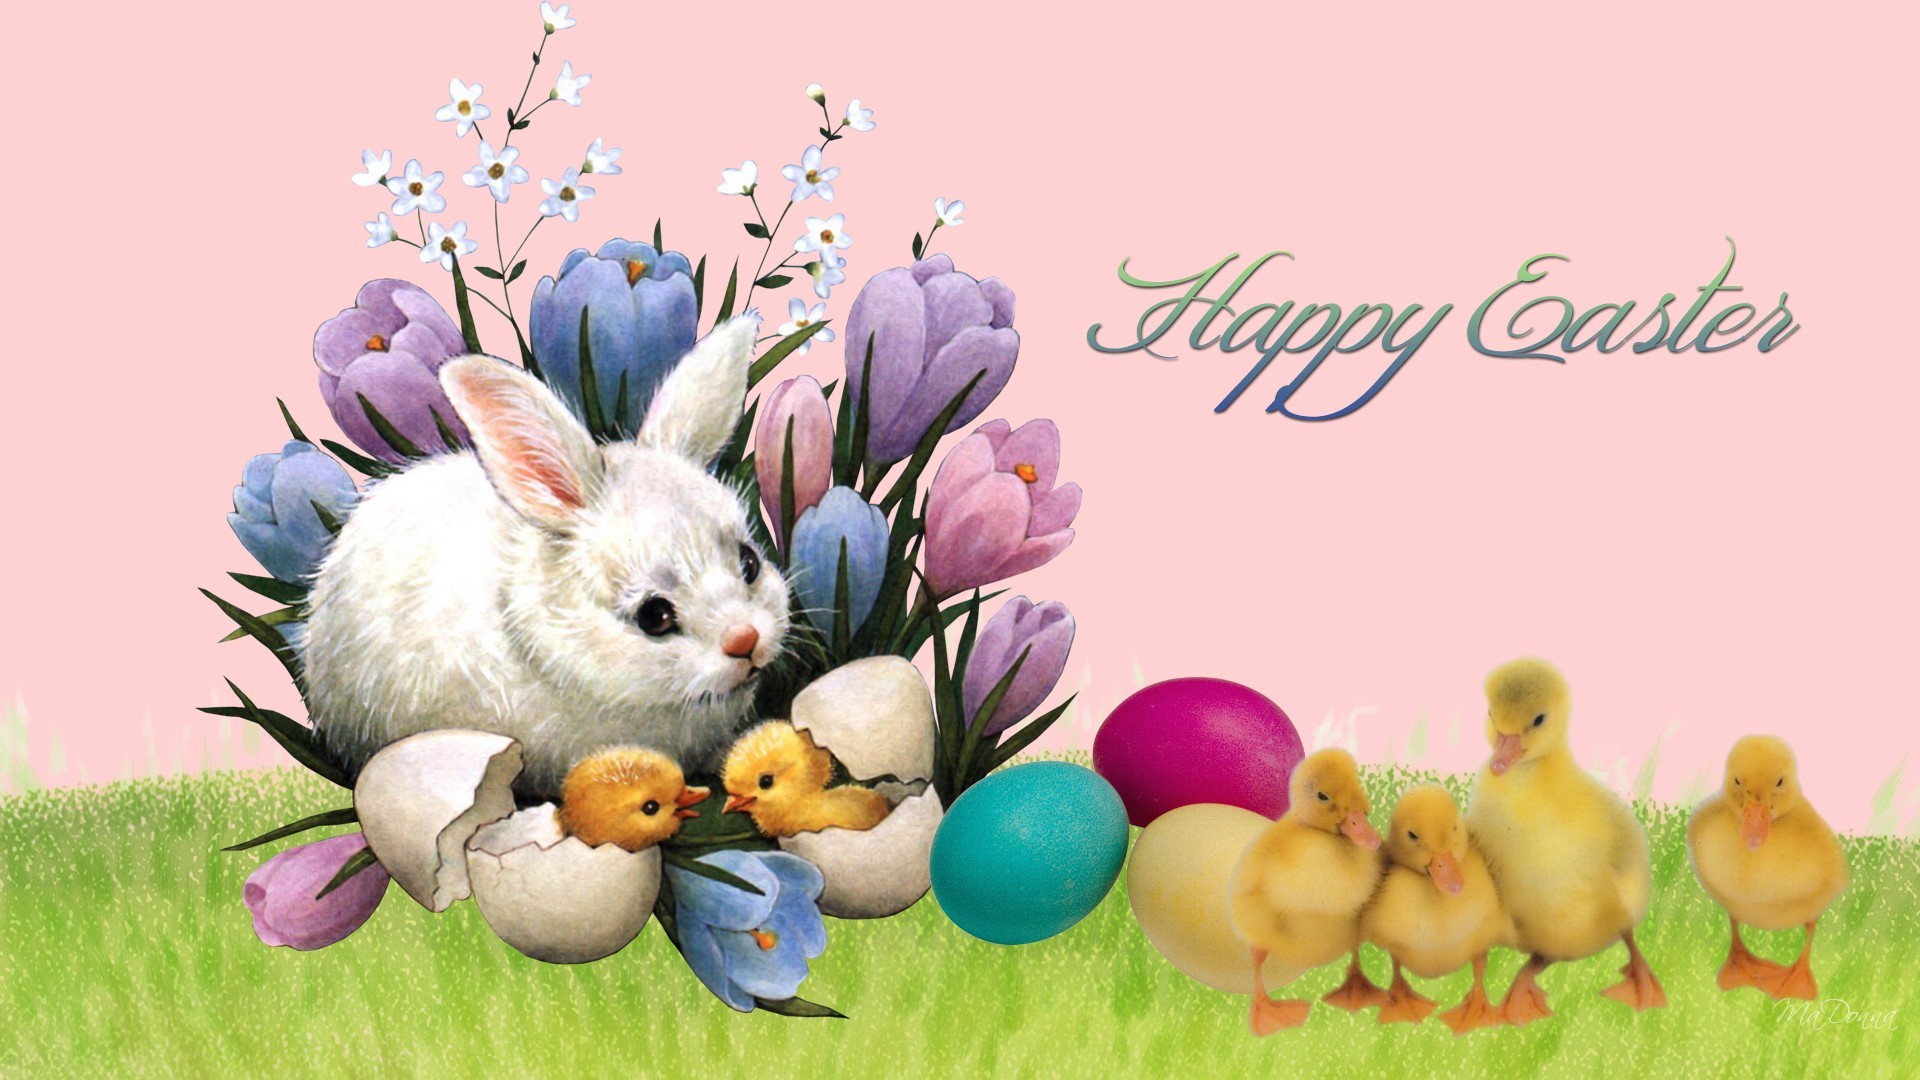 1920x1080 free wallpaper easter bunny rabbits | Easter Bunny Friends